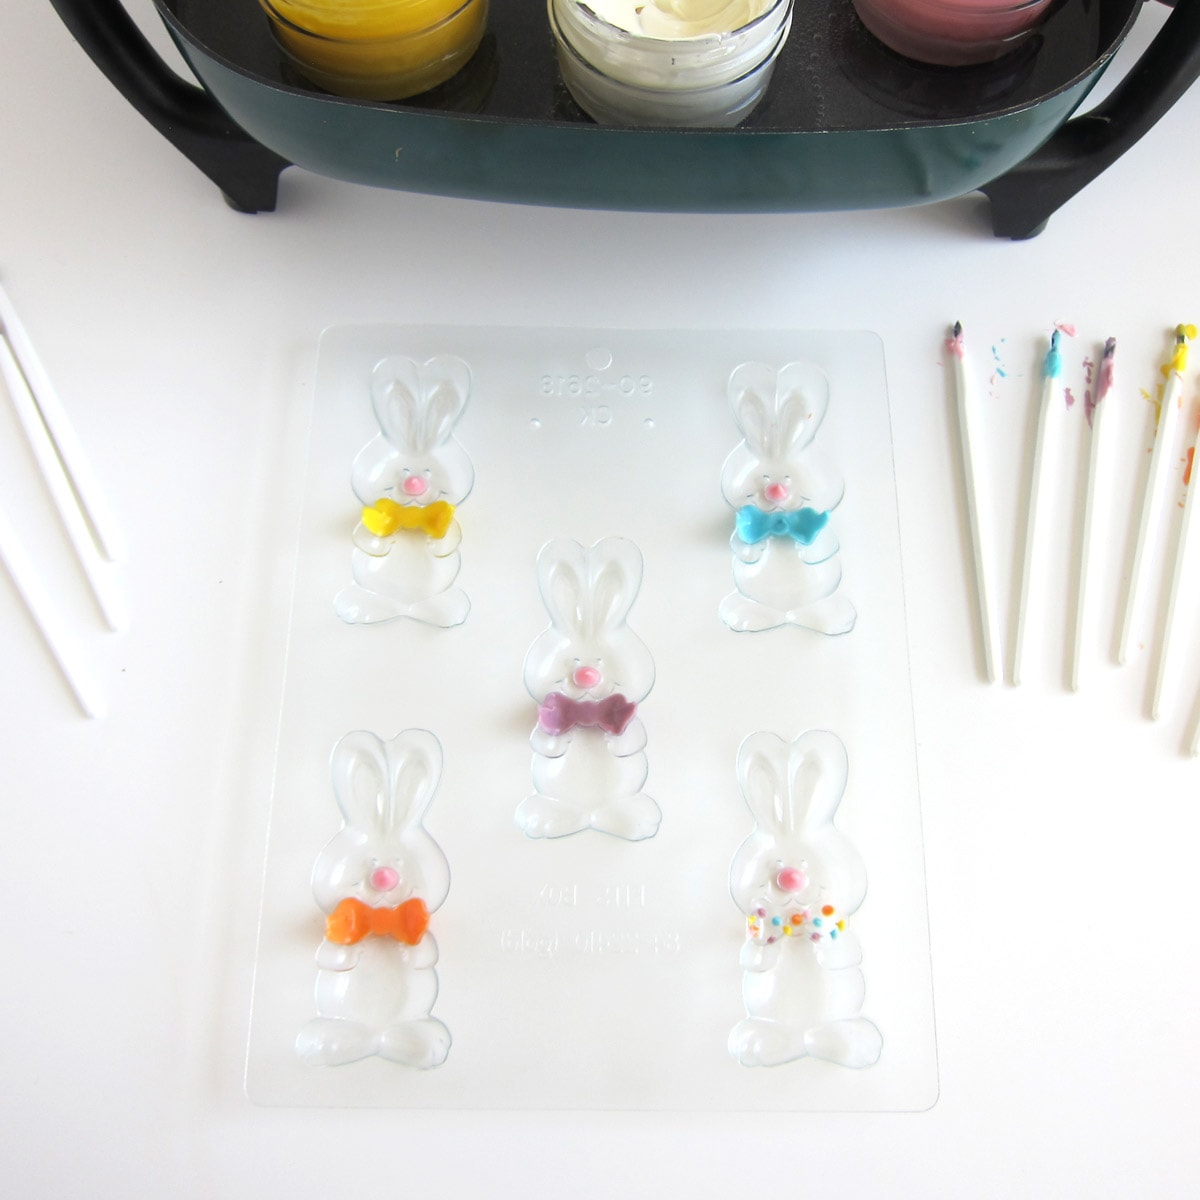 Bunny candy molds painted with pink noses and colorful bow ties.